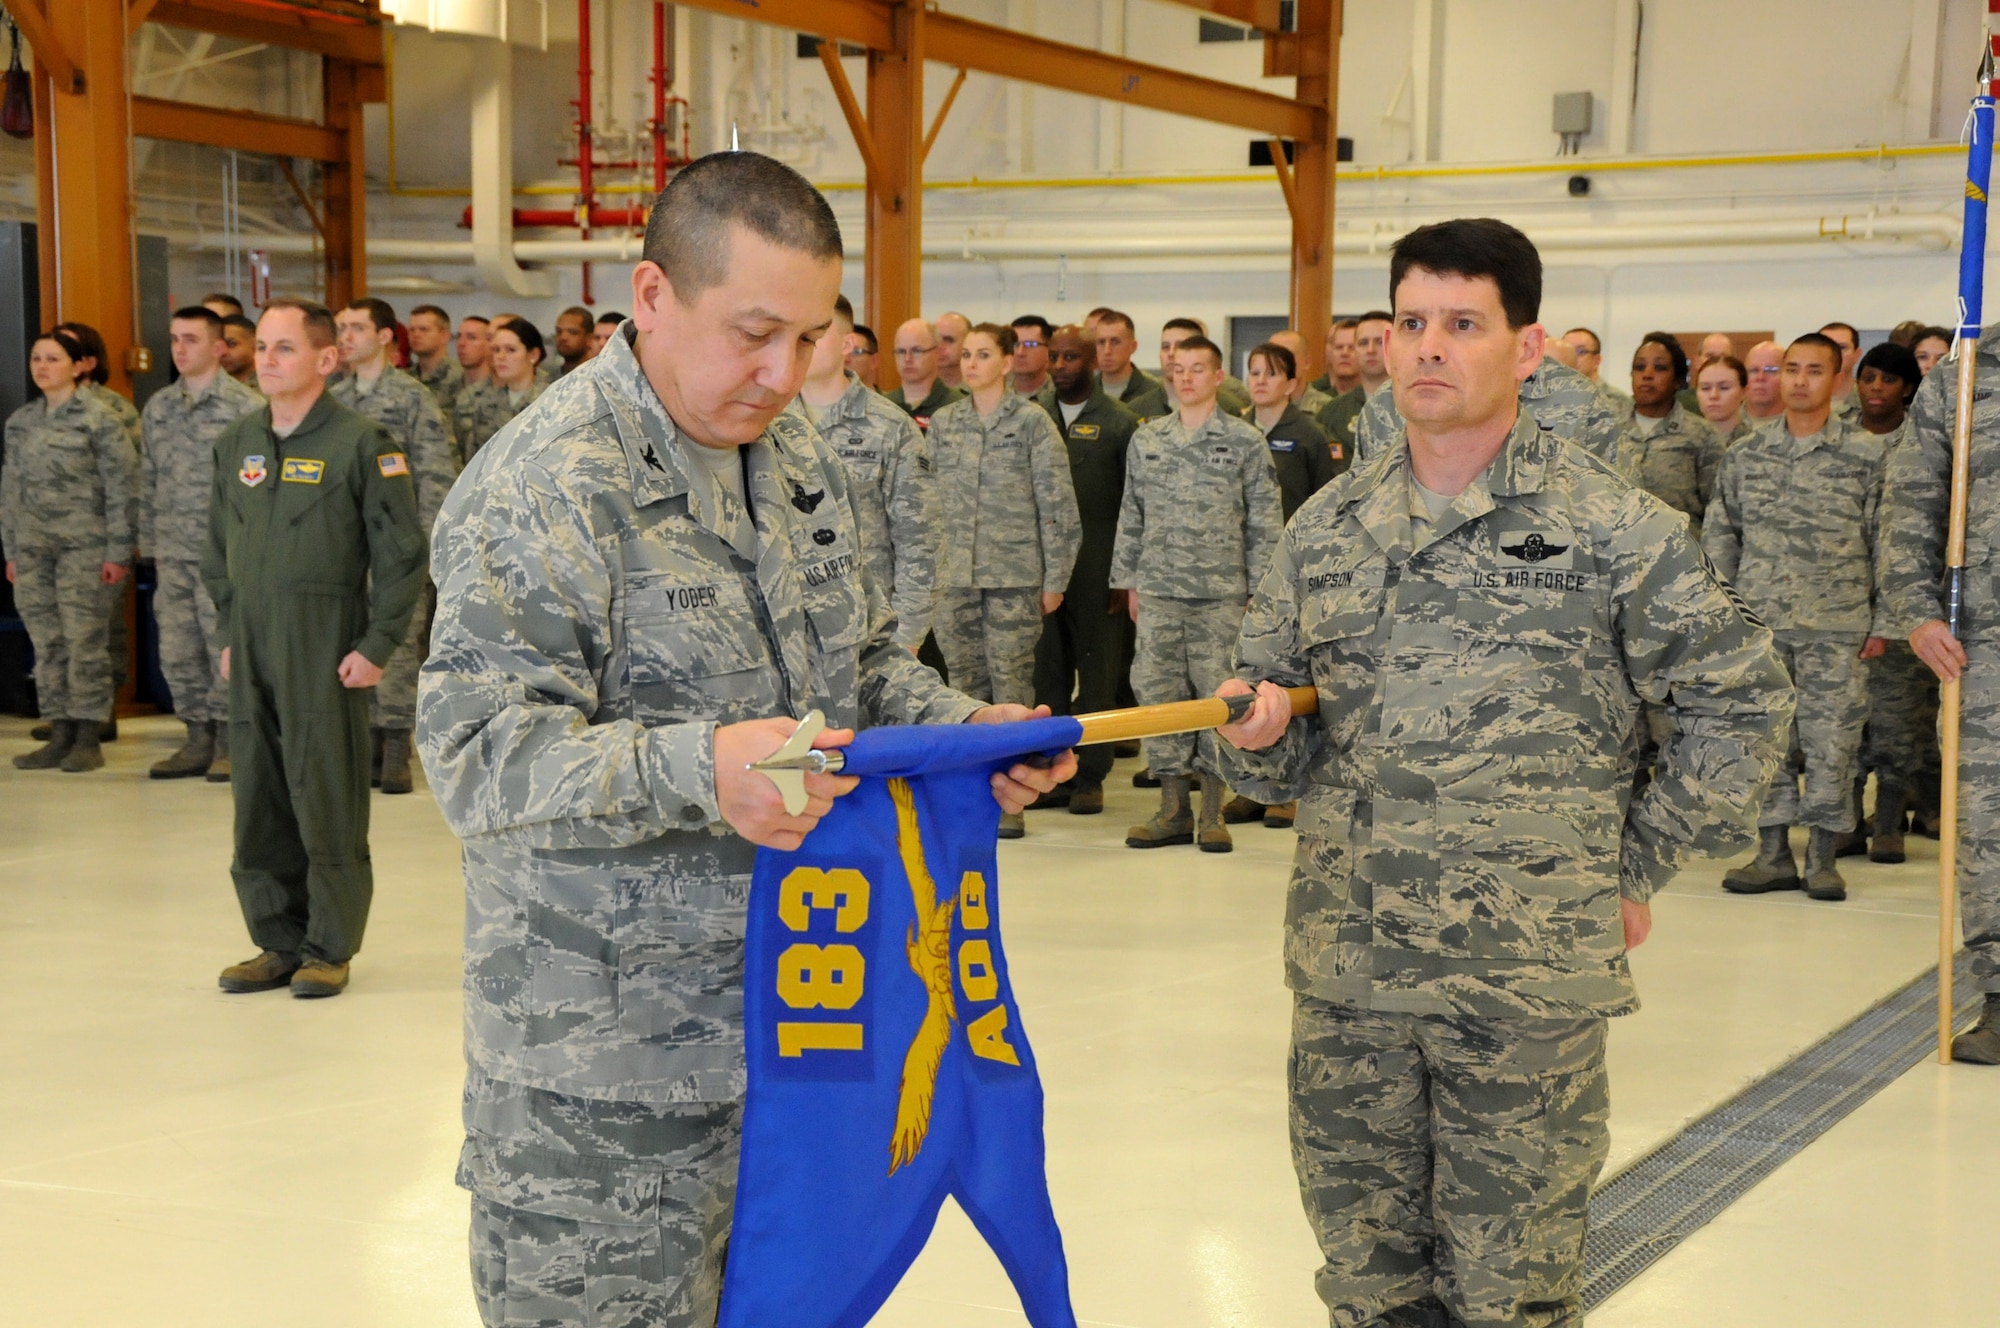 Col. Rick G. Yoder, commander of the 183rd Air Operations Group in Springfield, Illinois, unfurls a flag to mark the activation of units given new roles in a ceremony here Jan. 10, 2016.  The Illinois Air National Guard unit is responsible for command and control missions in combat theaters around the world.  Yoder is assisted by the group’s First Sergeant, Senior Master Sgt. Brent Simpson (U.S.  Air National Guard photo by Master Sgt. Shaun Kerr/Released)